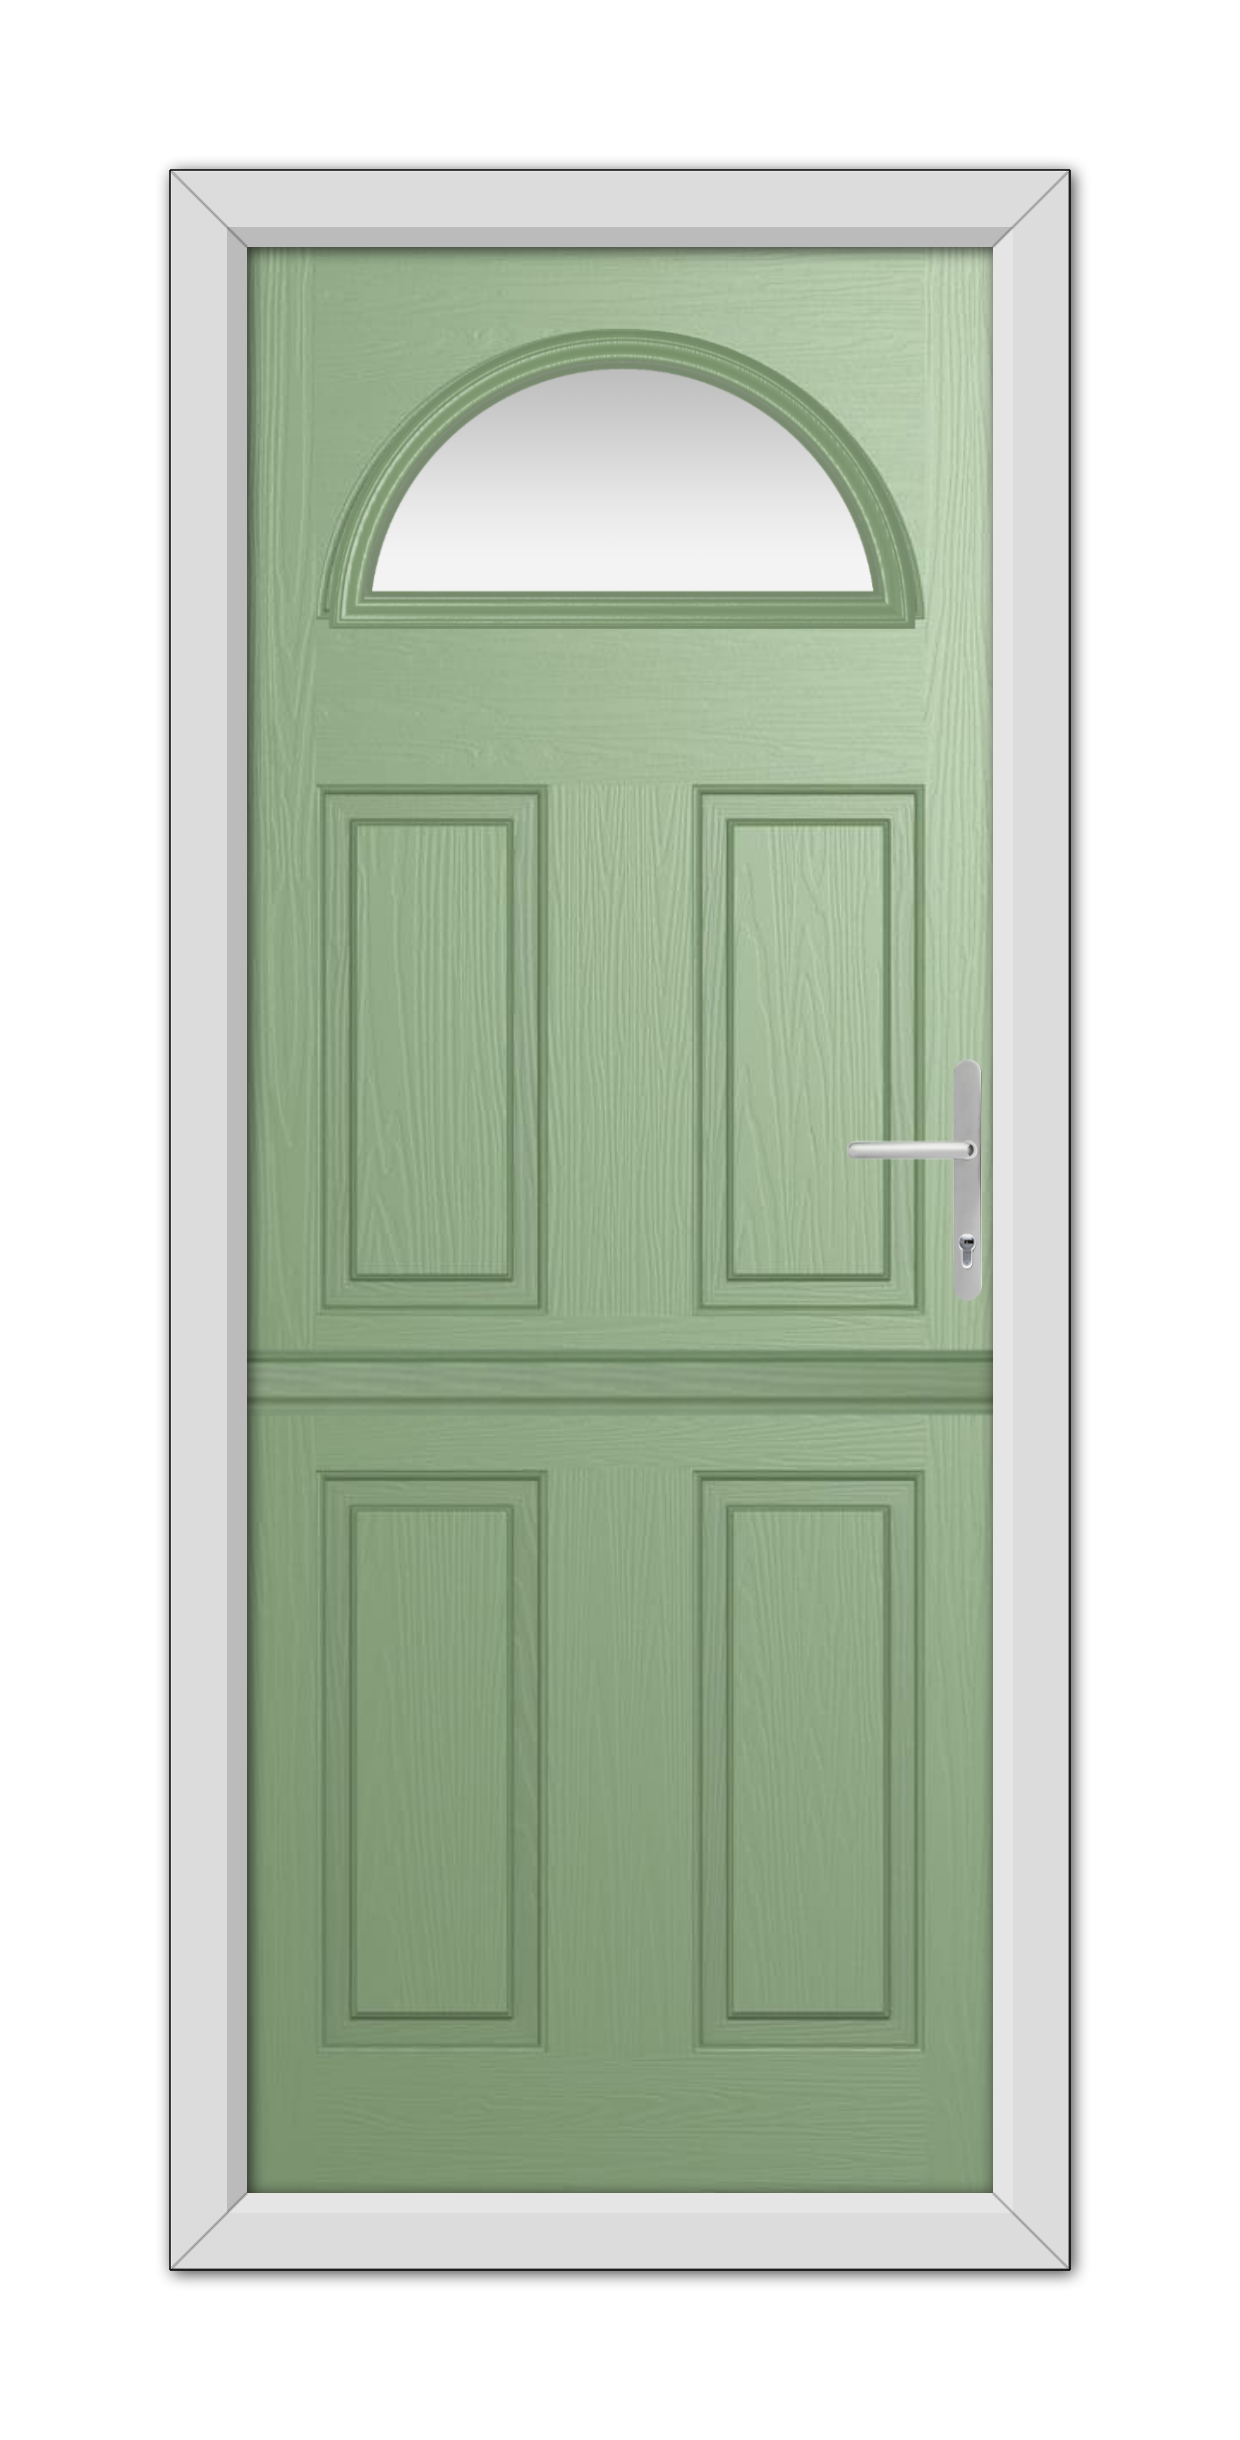 A Chartwell Green Winslow 1 Stable Composite Door with an arched window at the top, set in a white frame, equipped with a modern silver handle.